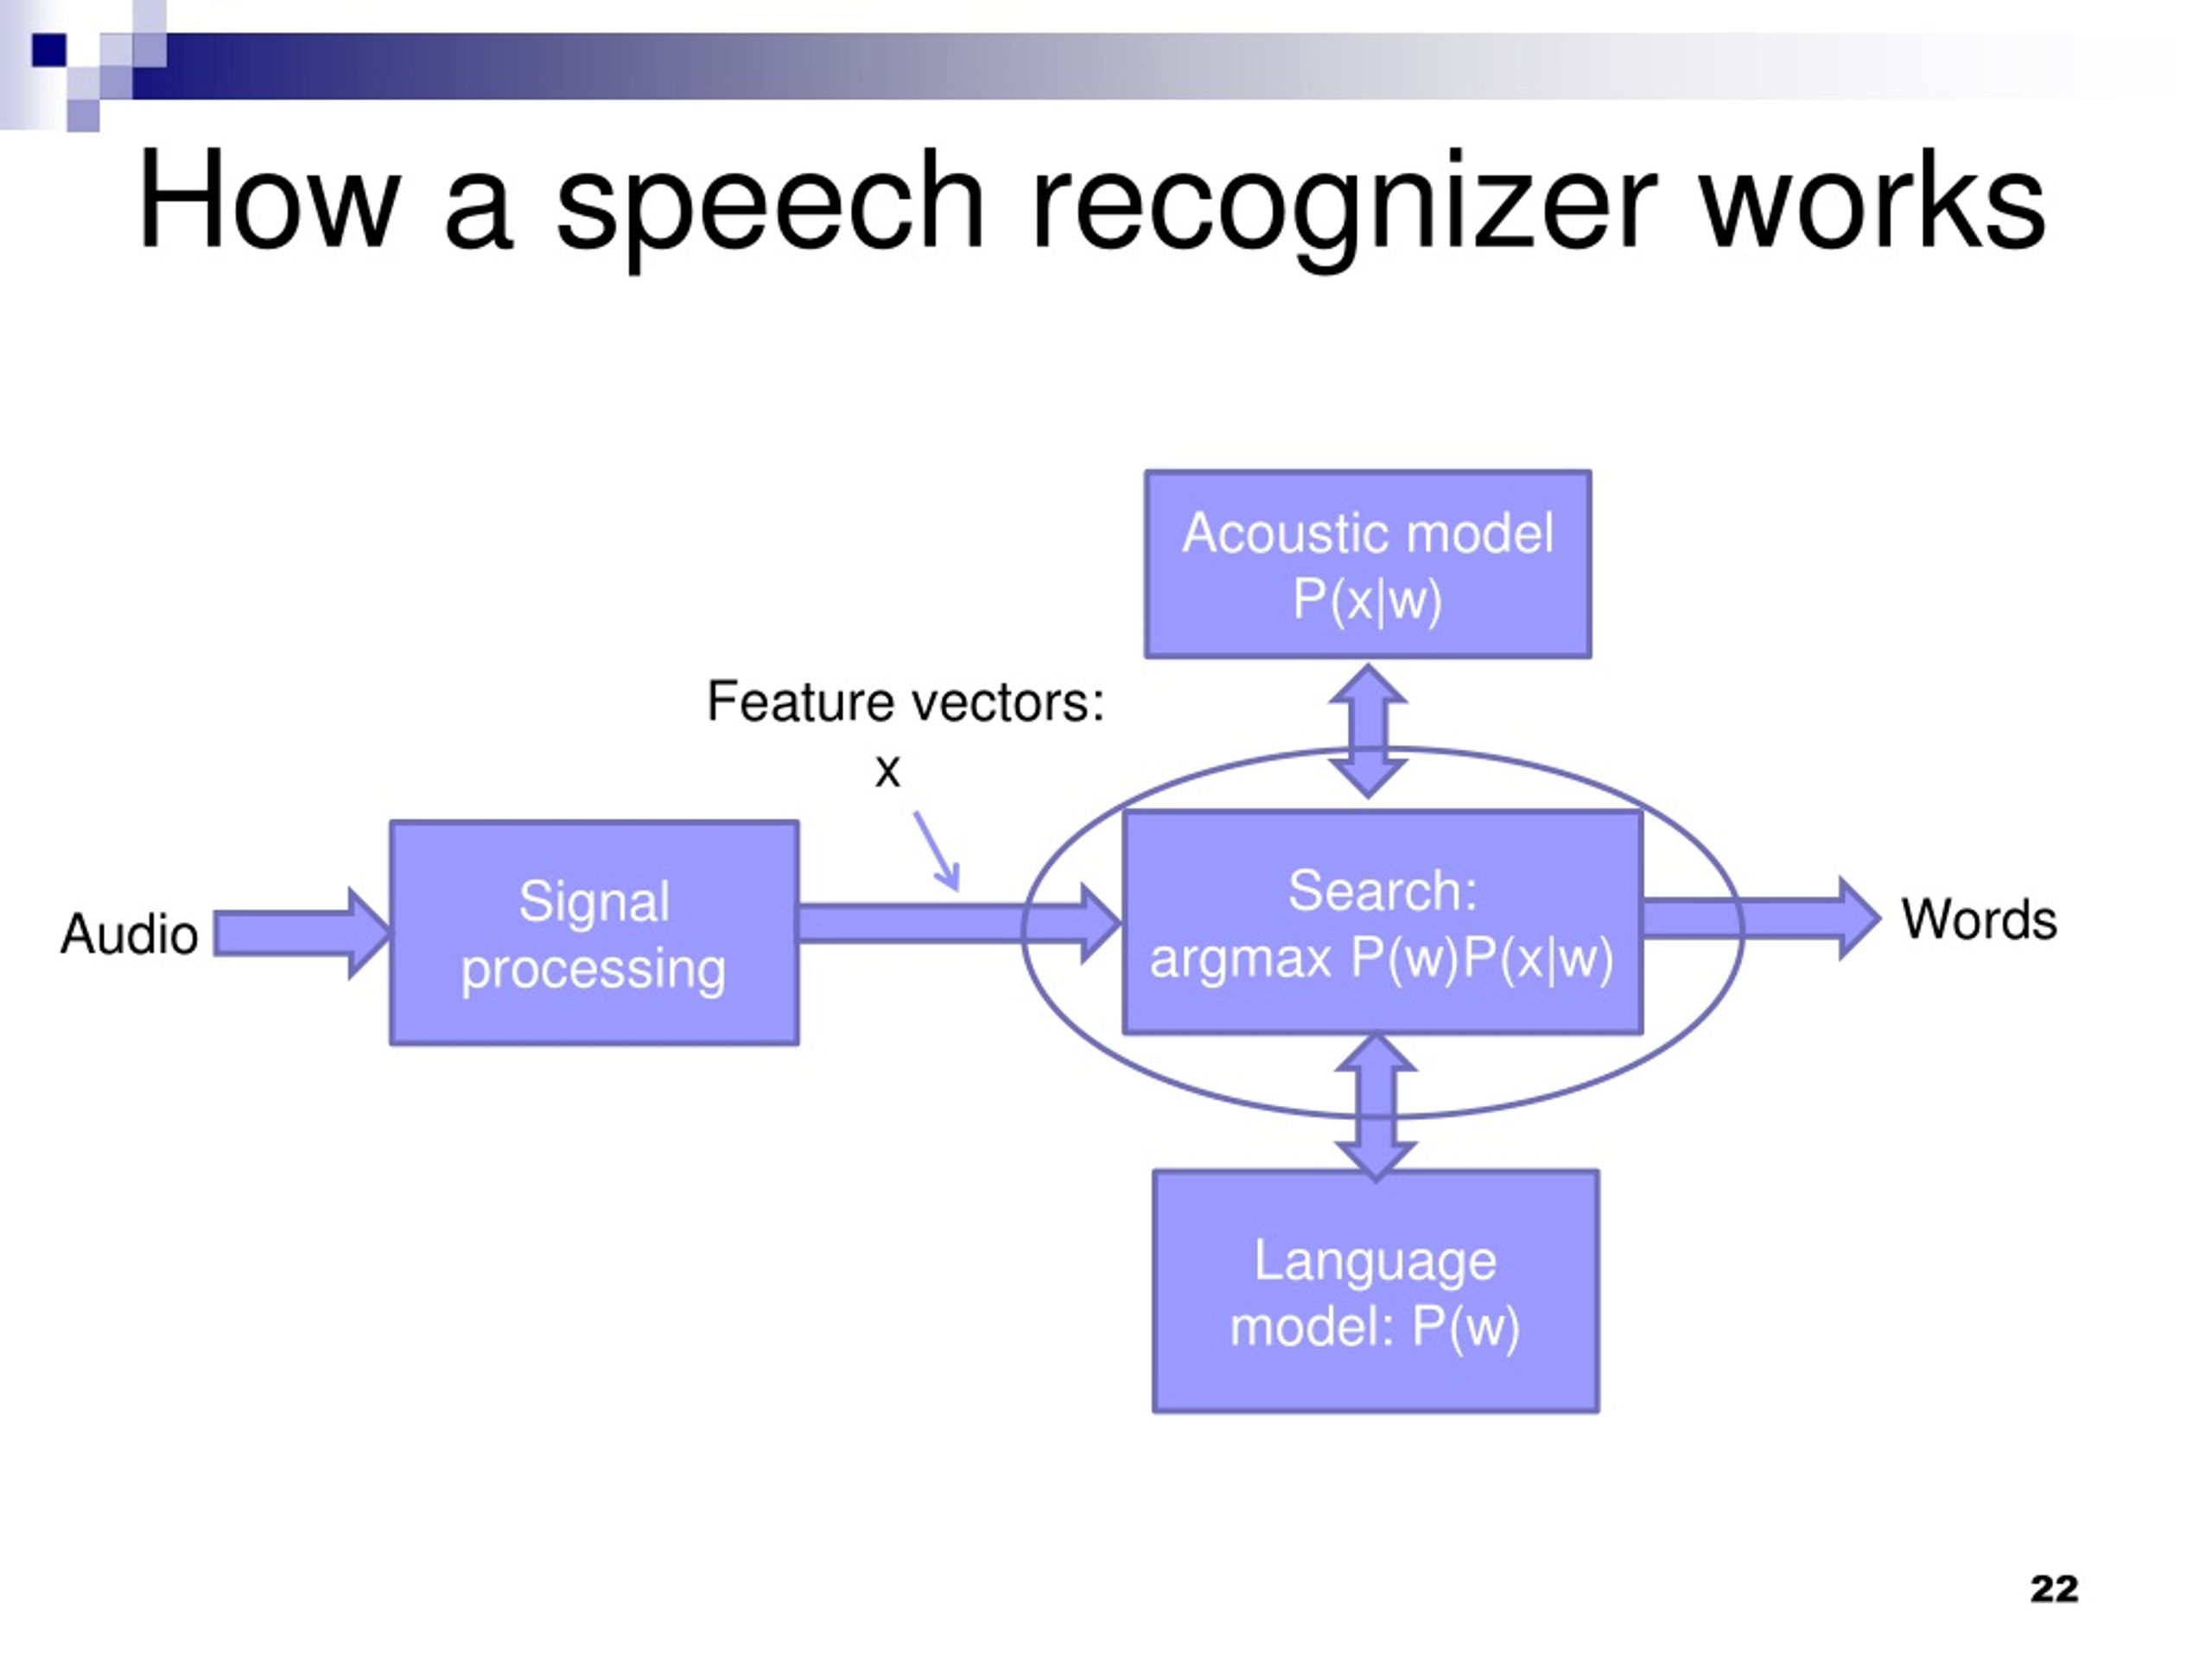 meaning of speech recognizer